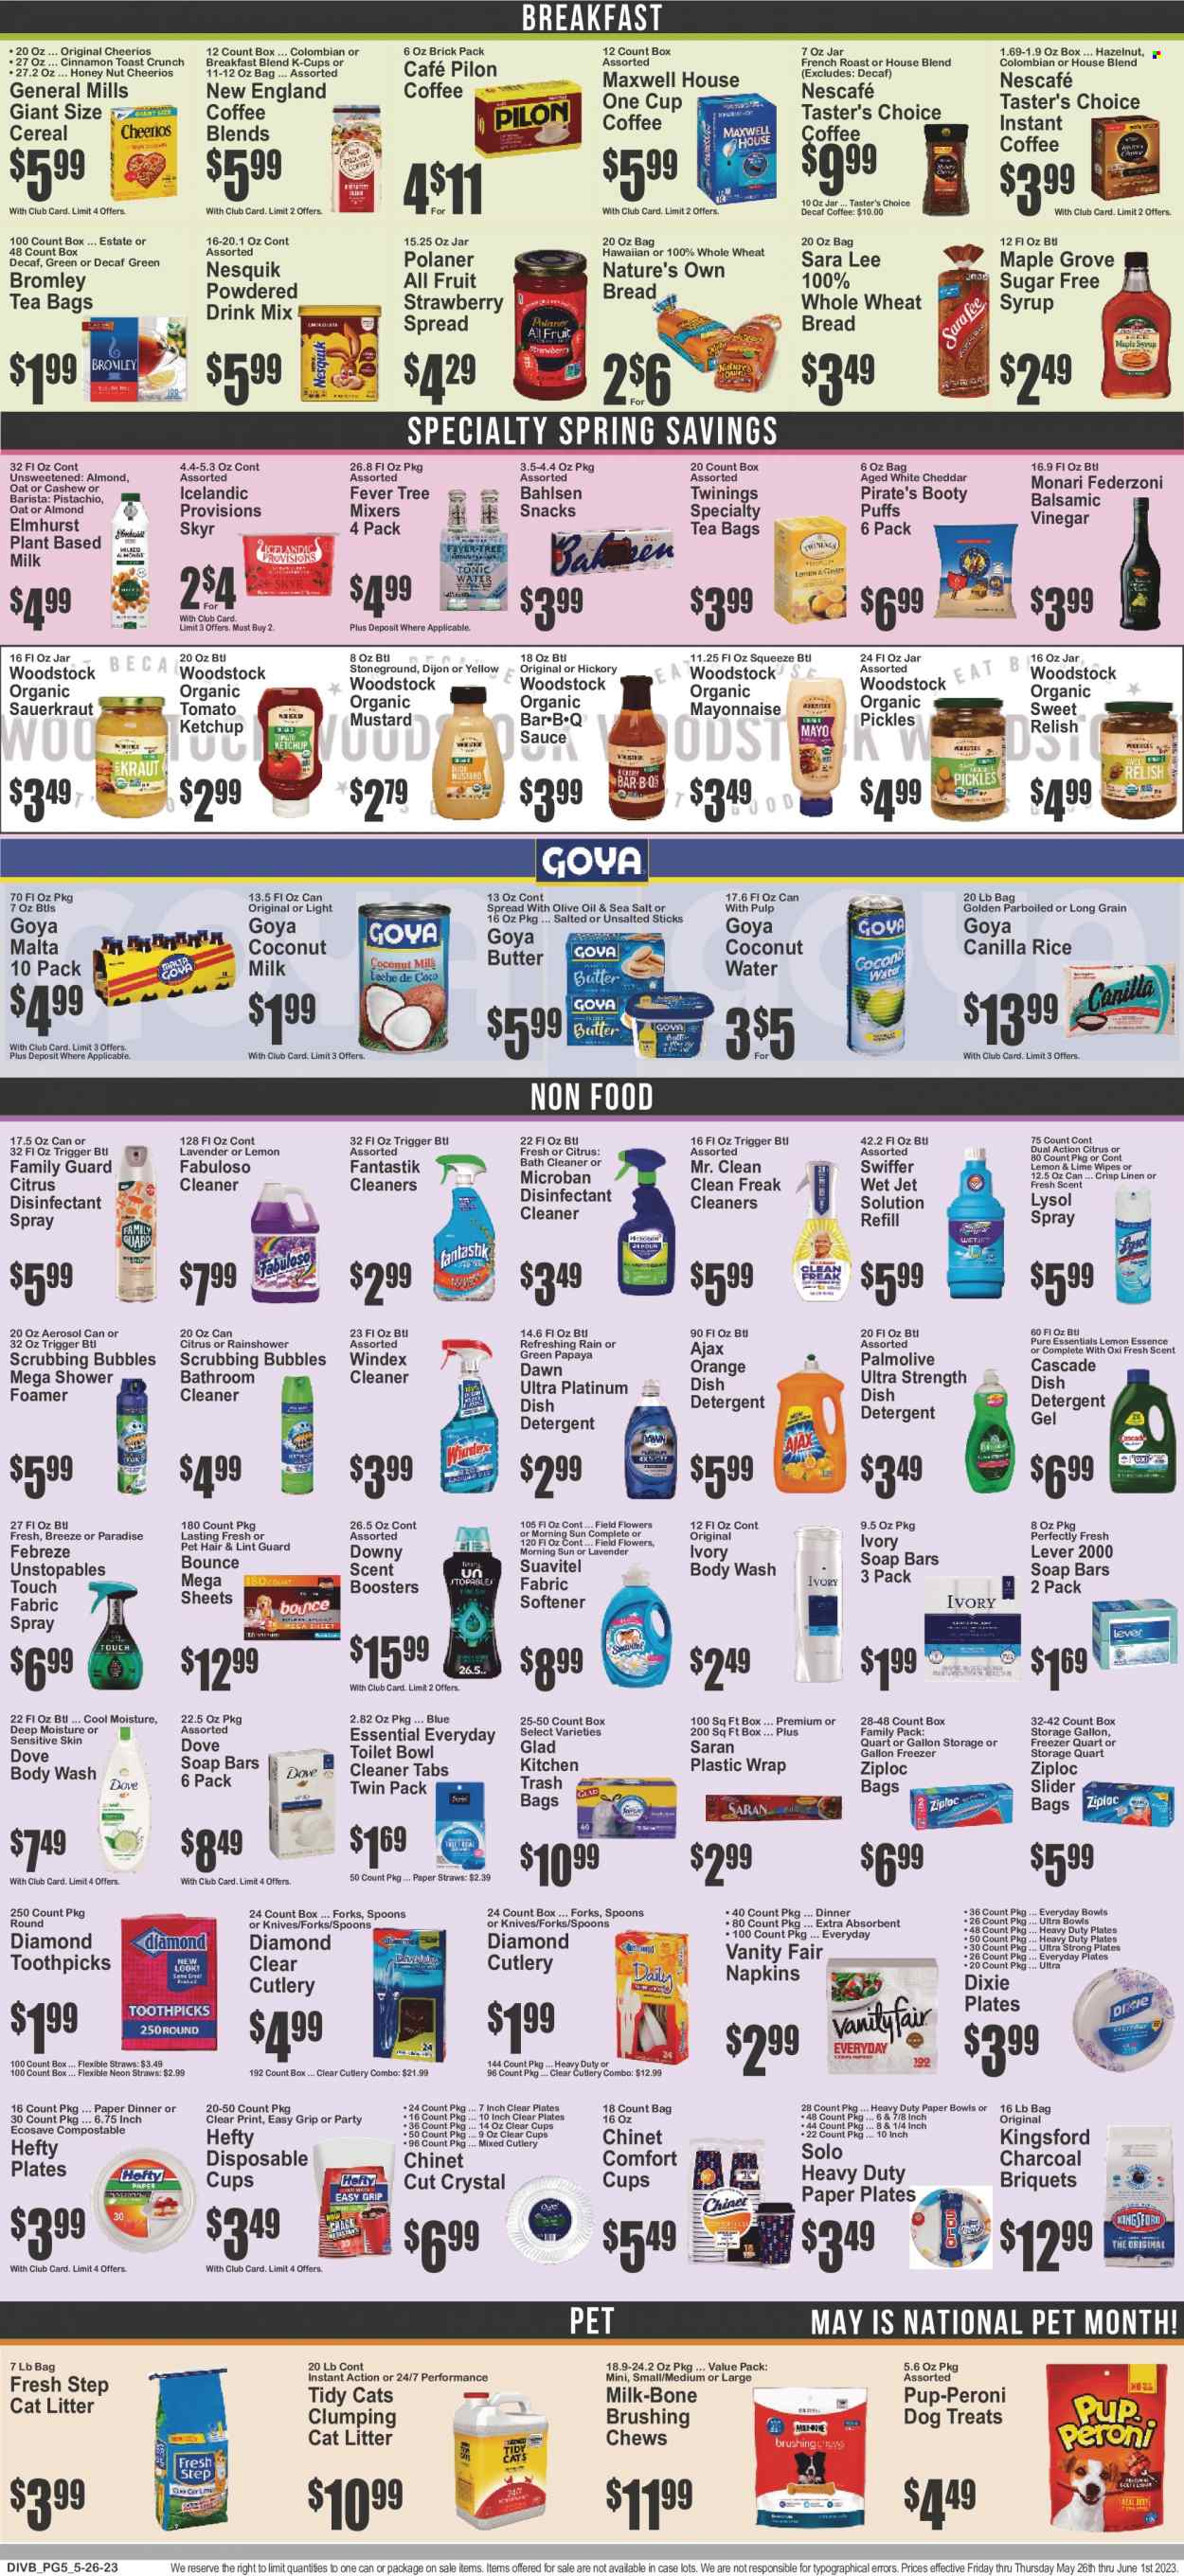 thumbnail - Super Fresh Flyer - 05/26/2023 - 06/01/2023 - Sales products - wheat bread, Sara Lee, puffs, papaya, oranges, sauce, Kingsford, roast, snack, cheddar, cheese, Nesquik, butter, mayonnaise, Dove, chewing gum, General Mills, coconut milk, sauerkraut, pickles, Goya, pickled cabbage, cereals, Cheerios, rice, cinnamon, mustard, ketchup, balsamic vinegar, vinegar, syrup, coconut water, water, powder drink, Maxwell House, tea bags, Twinings, coffee, instant coffee, Nescafé, coffee capsules, K-Cups, breakfast blend, beer, wipes, napkins, detergent, Febreze, Windex, Scrubbing Bubbles, cleaner, desinfection, toilet cleaner, Lysol, Ajax, Fabuloso, Swiffer, bathroom cleaner, Cascade, Unstopables, fabric softener, Bounce, washing gel, scent booster, Suavitel, dishwasher cleaner, Jet, body wash, Palmolive, soap, knife, Hefty, paper plate, paper bowl, Dixie, straw. Page 5.